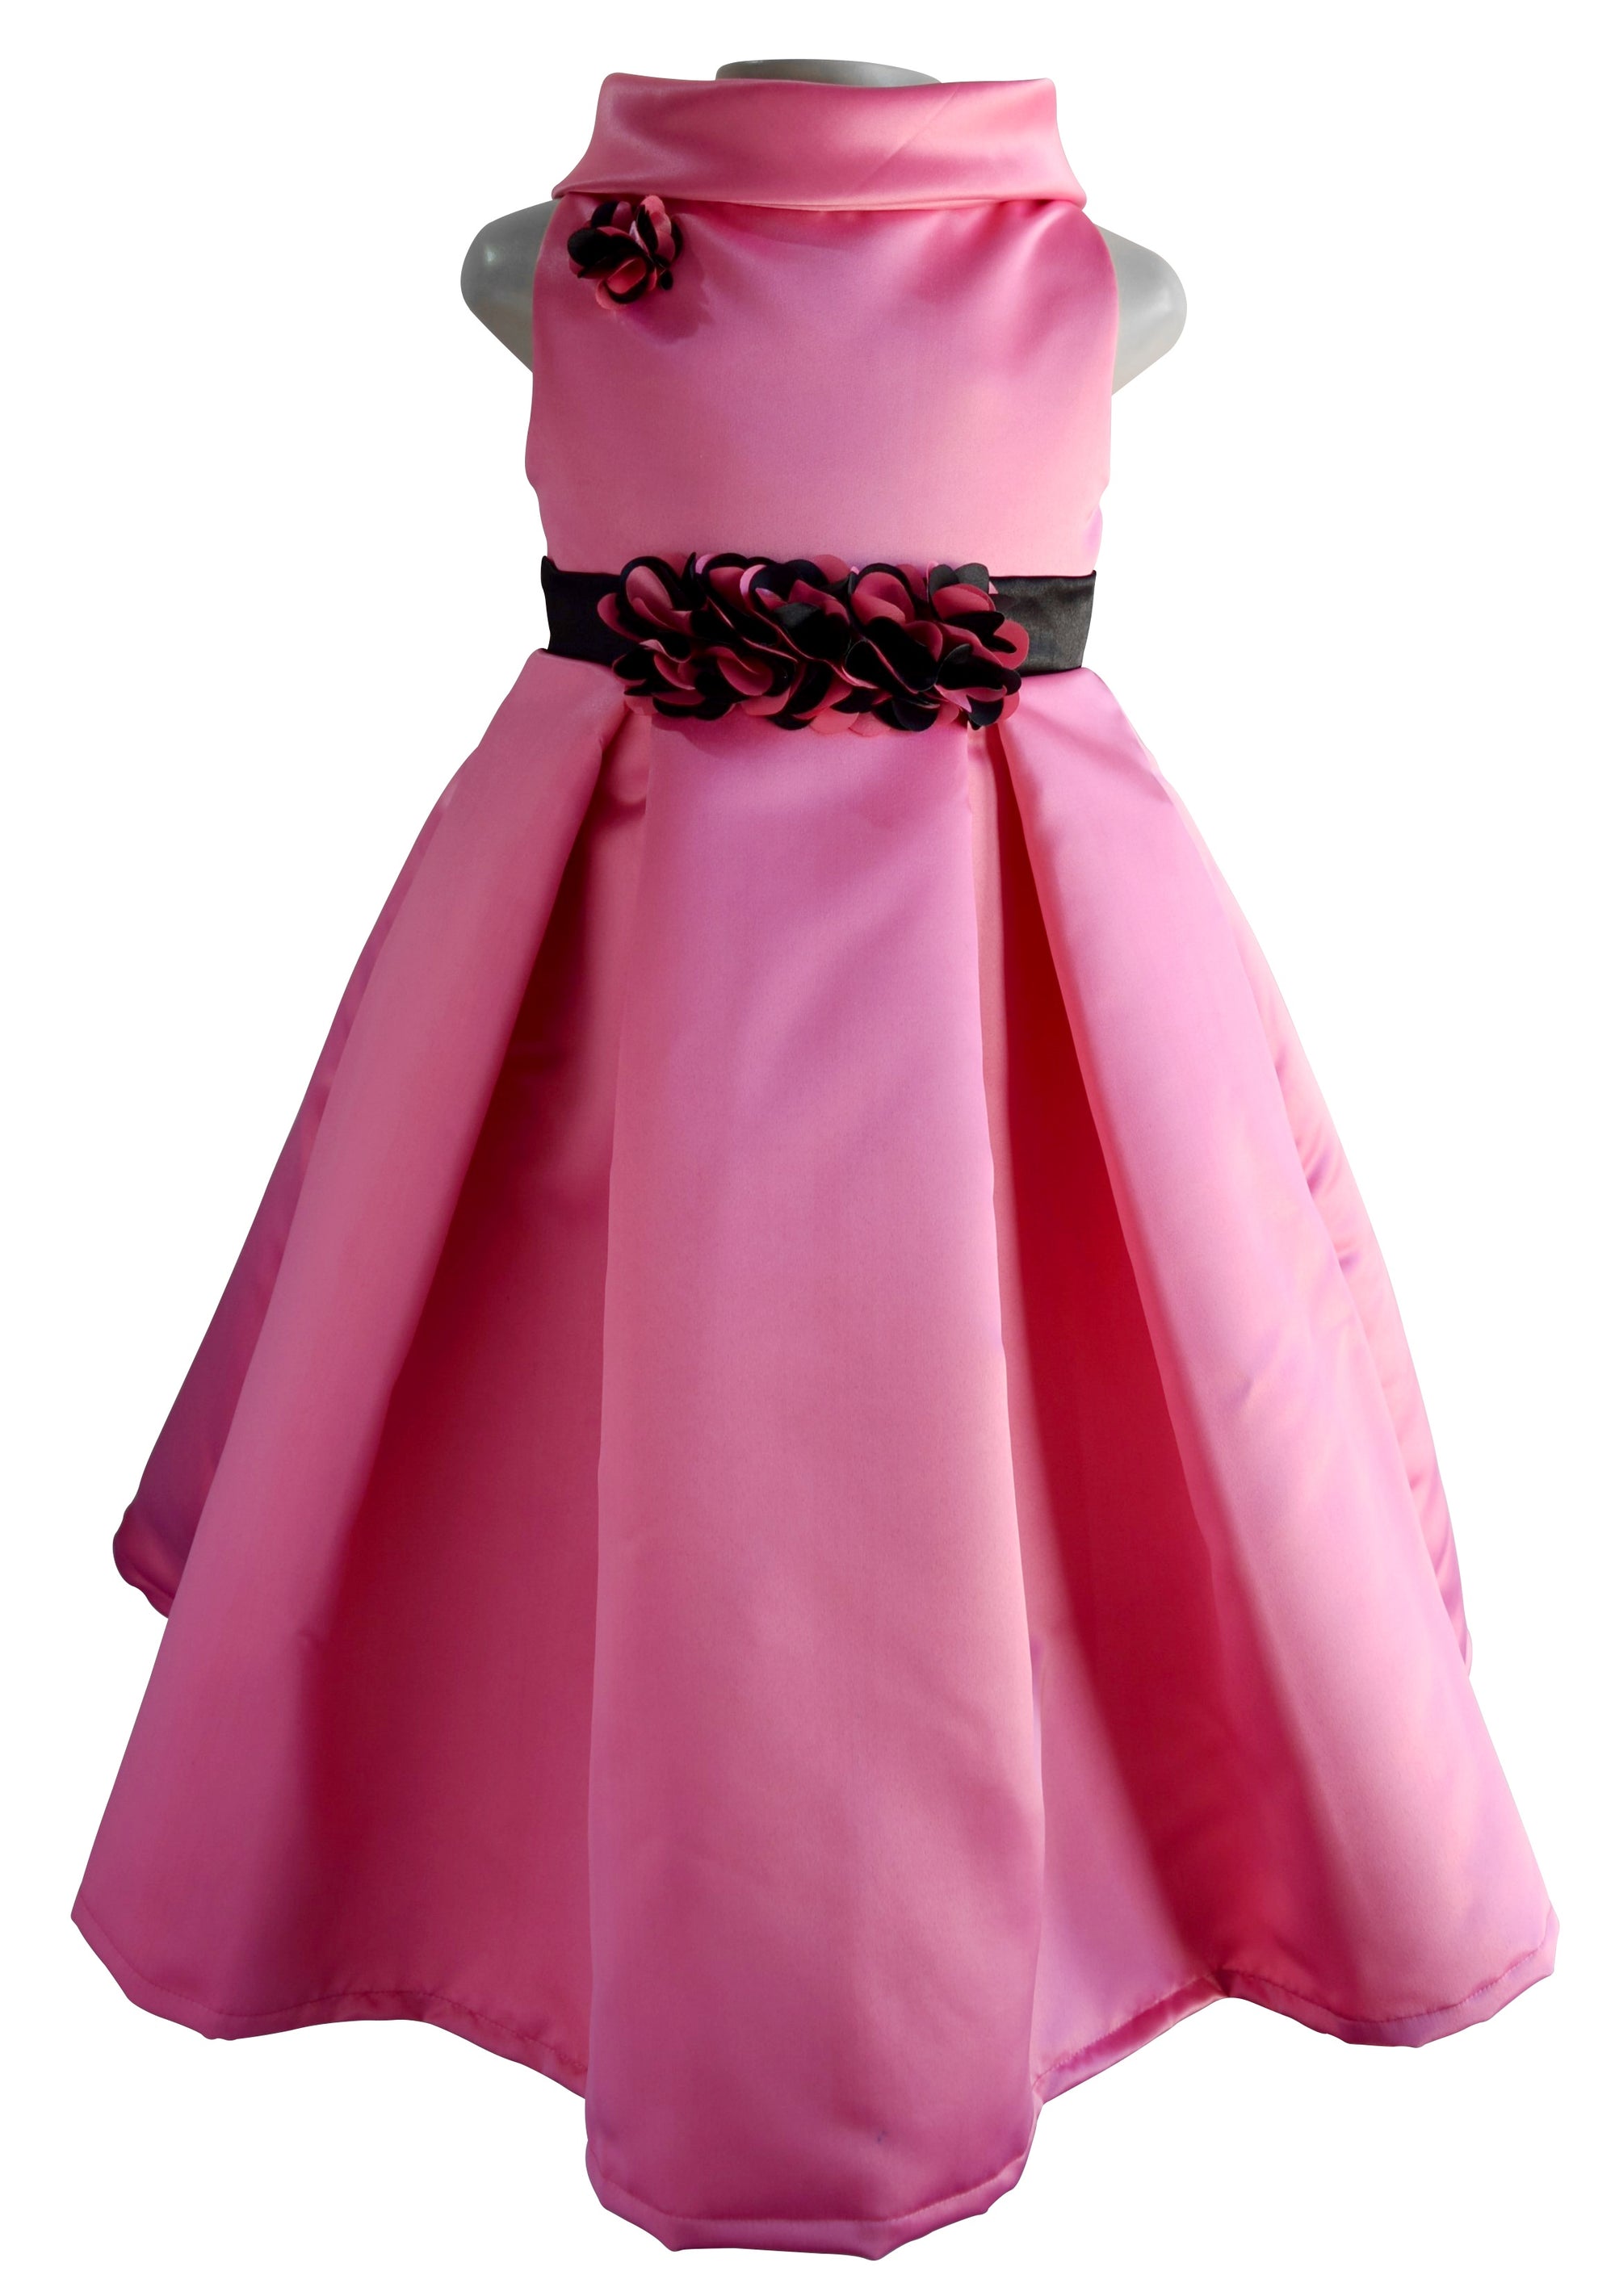 Discover more than 137 onion pink dress